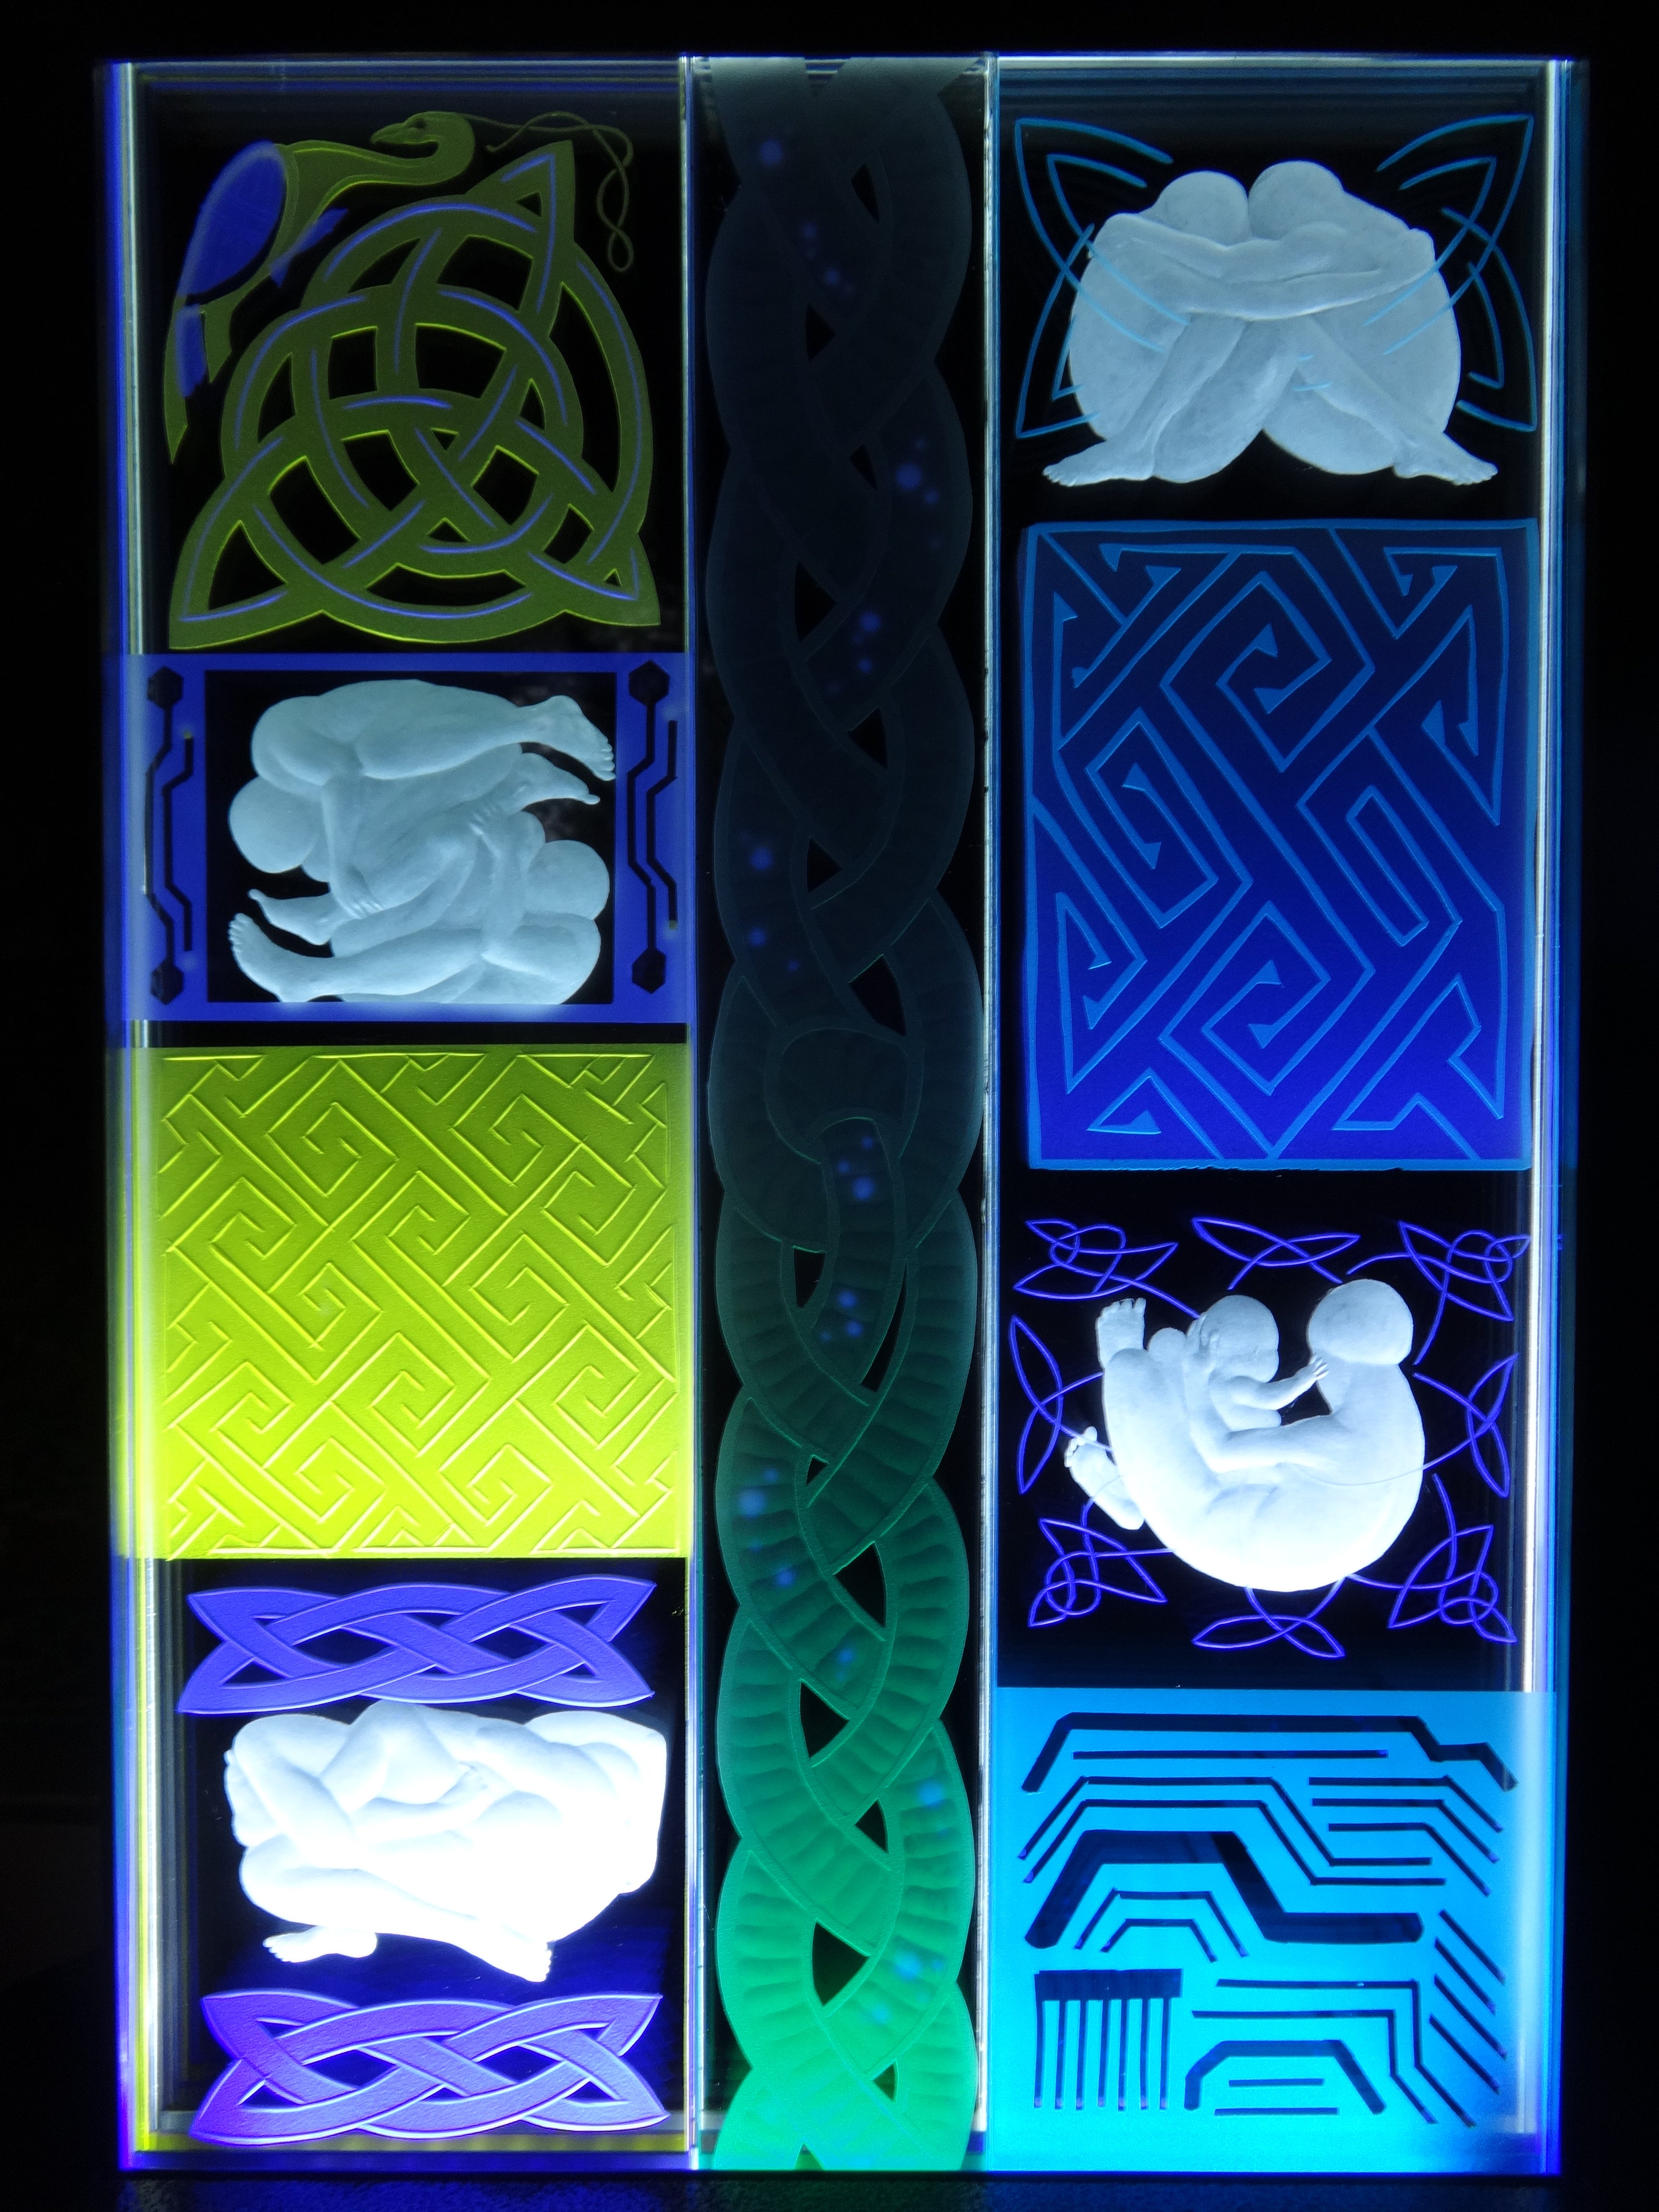 Alison Kinnaird, Family Tree, Wheel engraved optical glass, sandblasted, glass paint, LED light and steel mount, £5,625. SOLD - available to commission